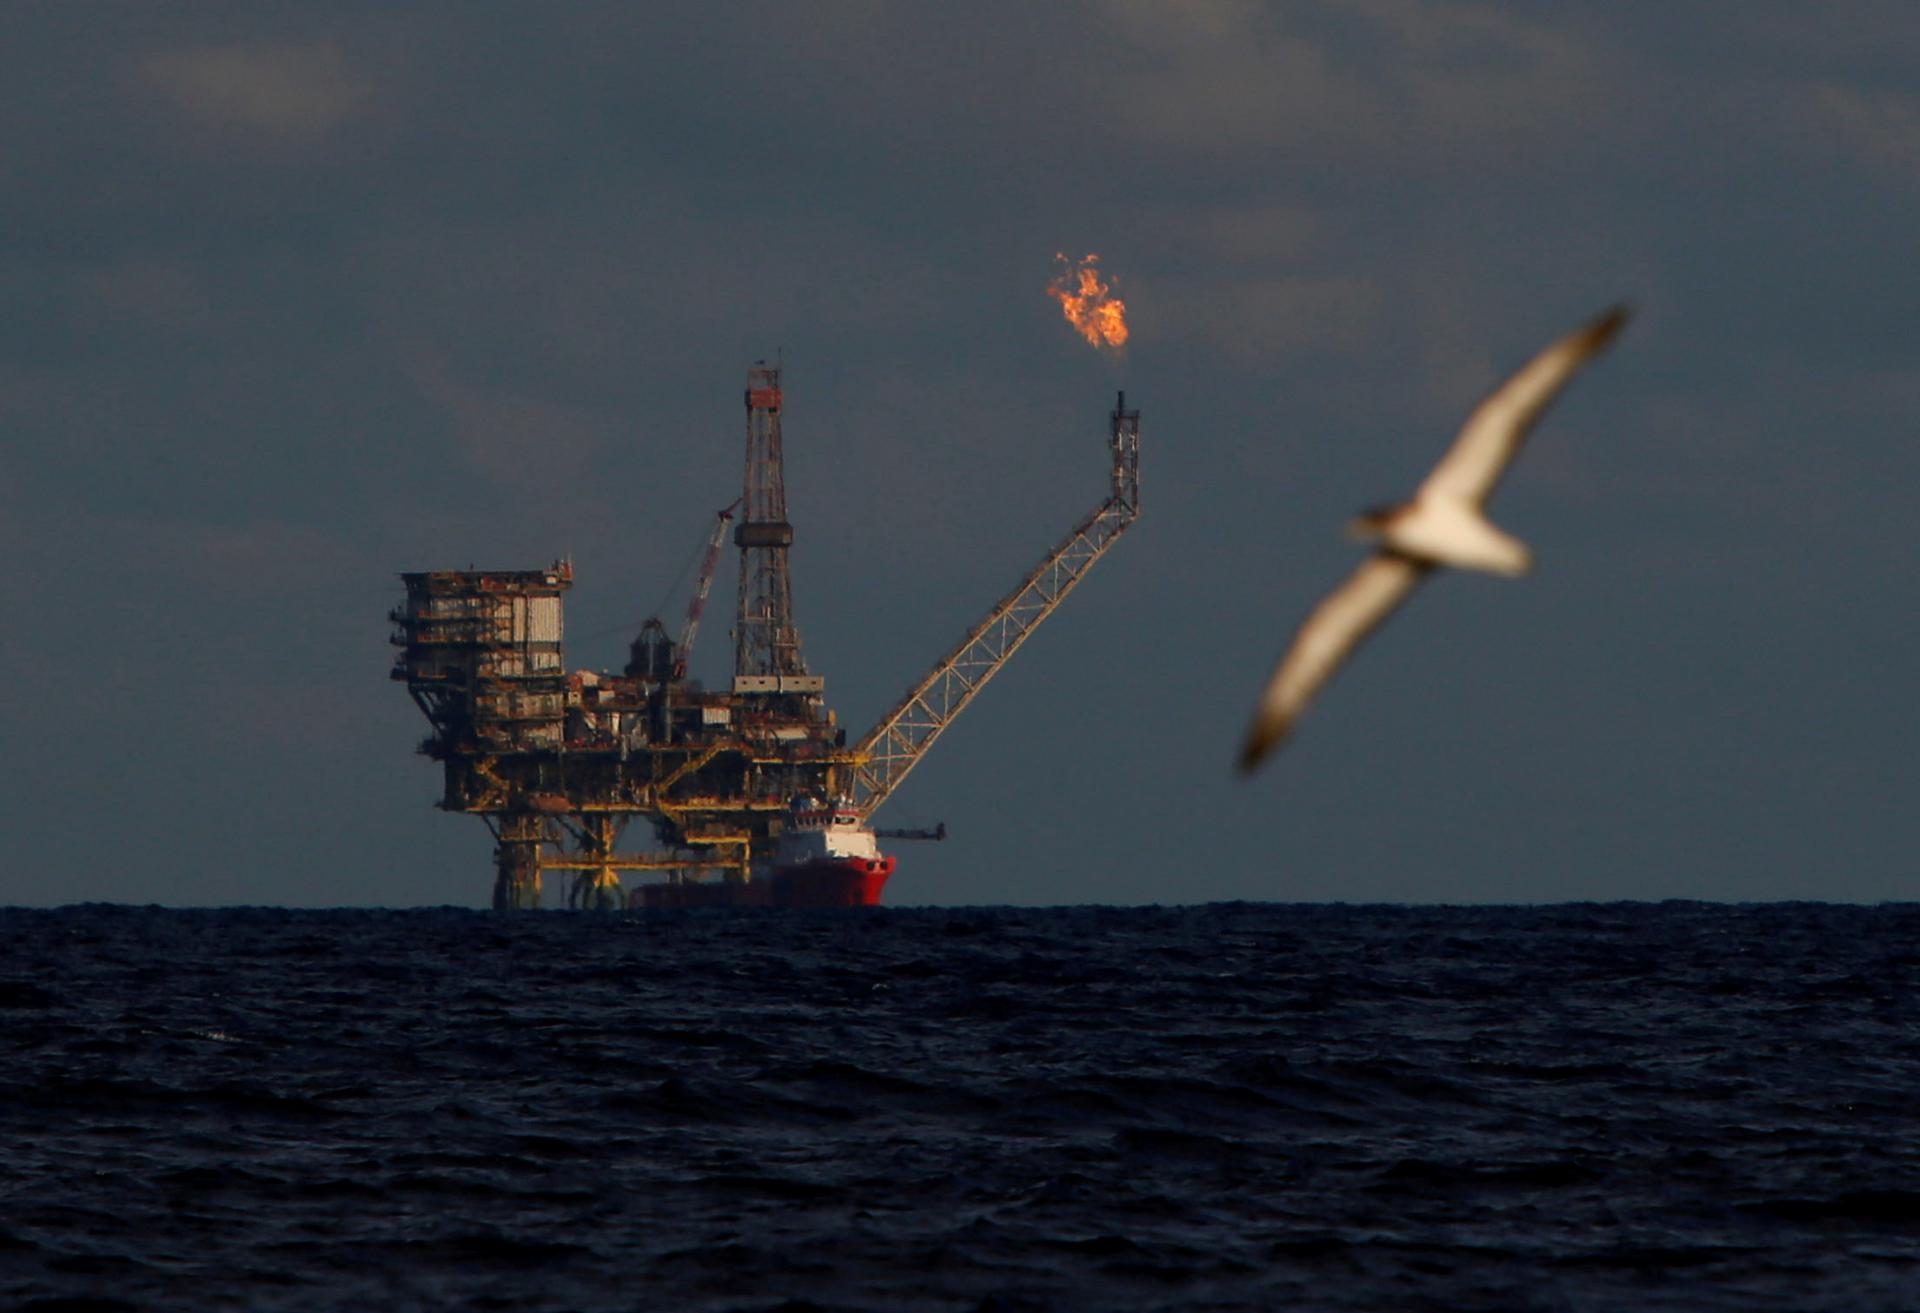 A seagull flies in front of an oil platform in the Bouri Oilfield some 70 nautical miles north of the coast of Libya, October 5, 2017.